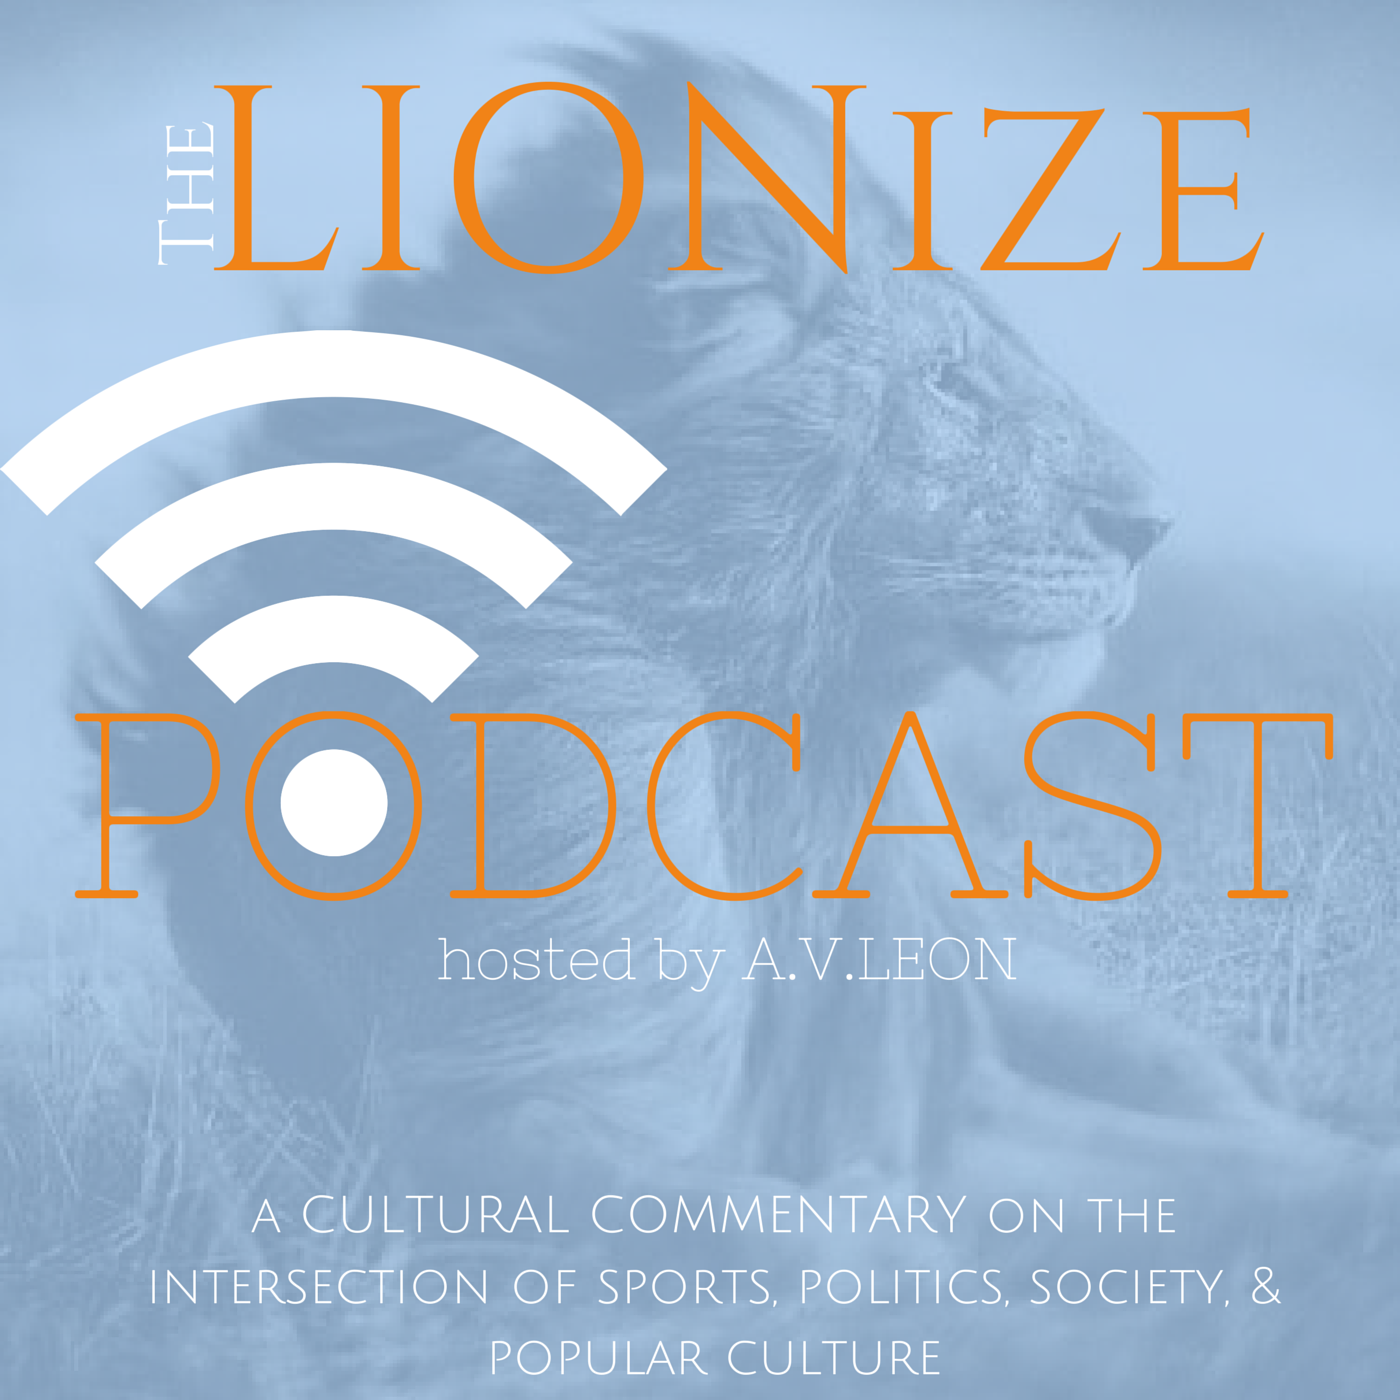 Go to The Lionize Podcast Feed Page